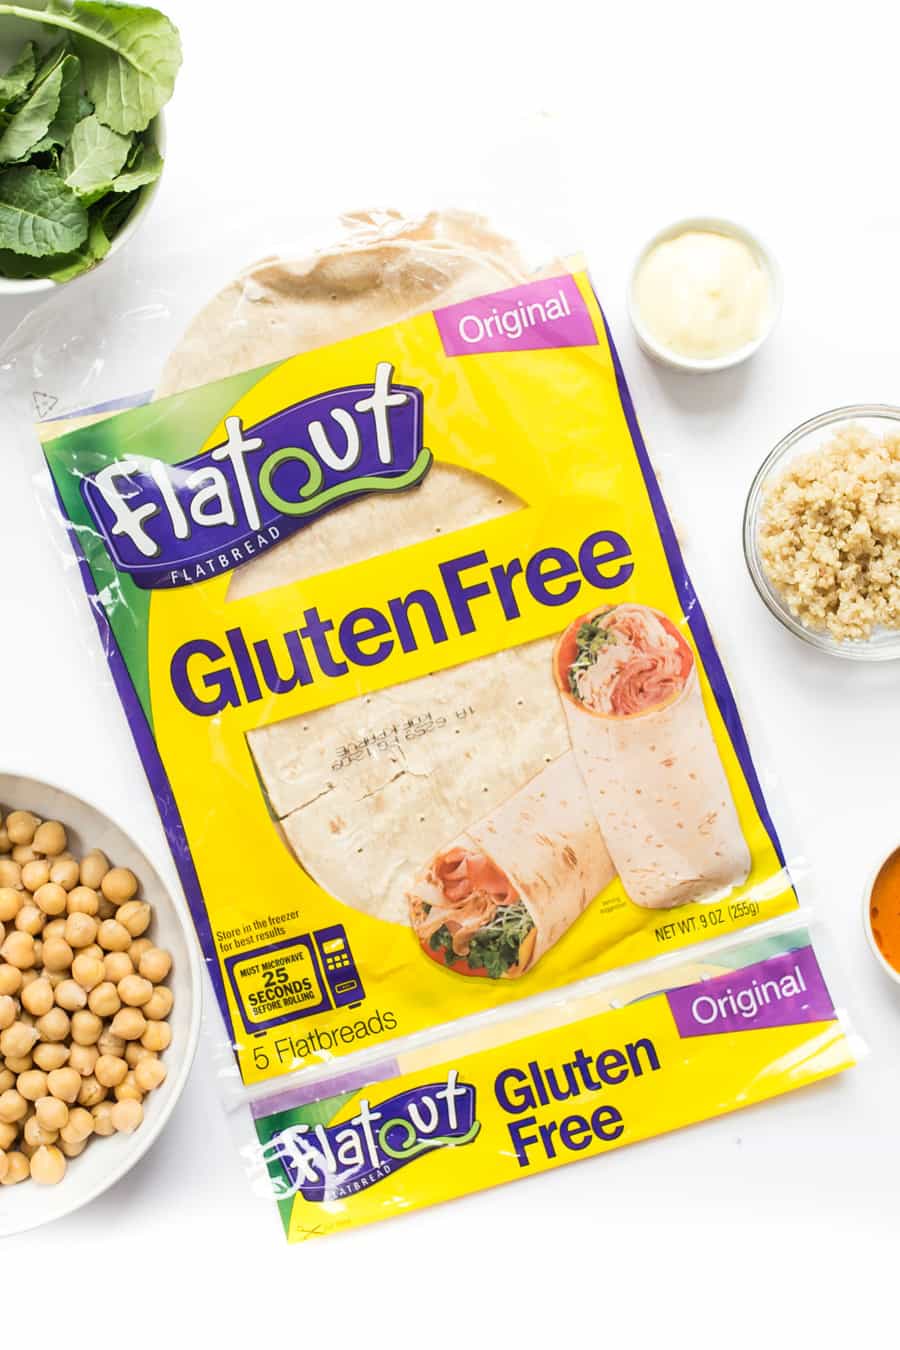 Light and healthy GLUTEN-FREE Flatbreads from Flatout Bread!